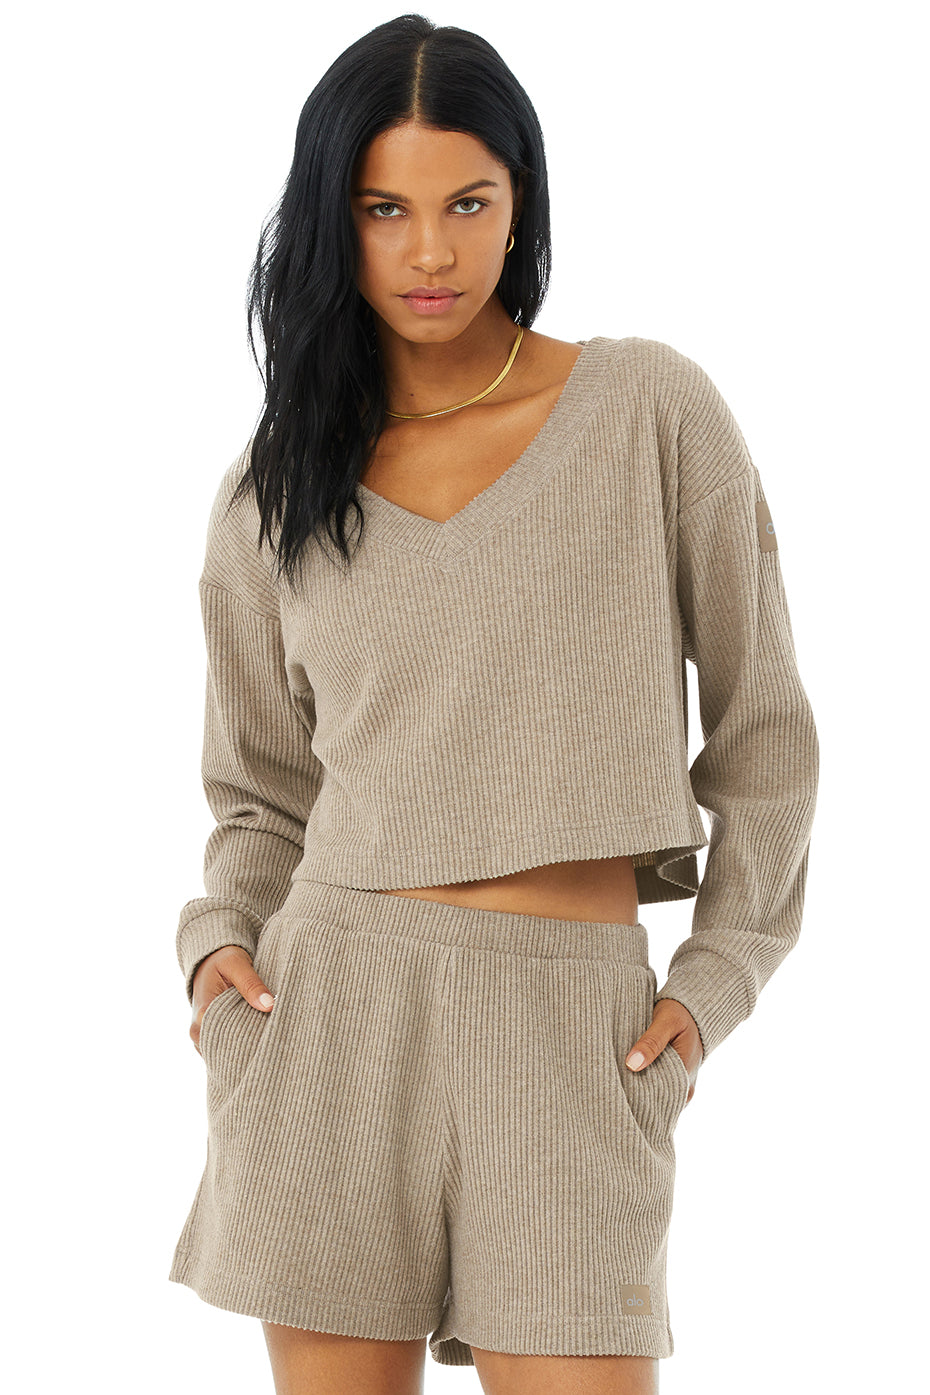 Muse V-Neck Pullover Top in Gravel Heather by Alo Yoga